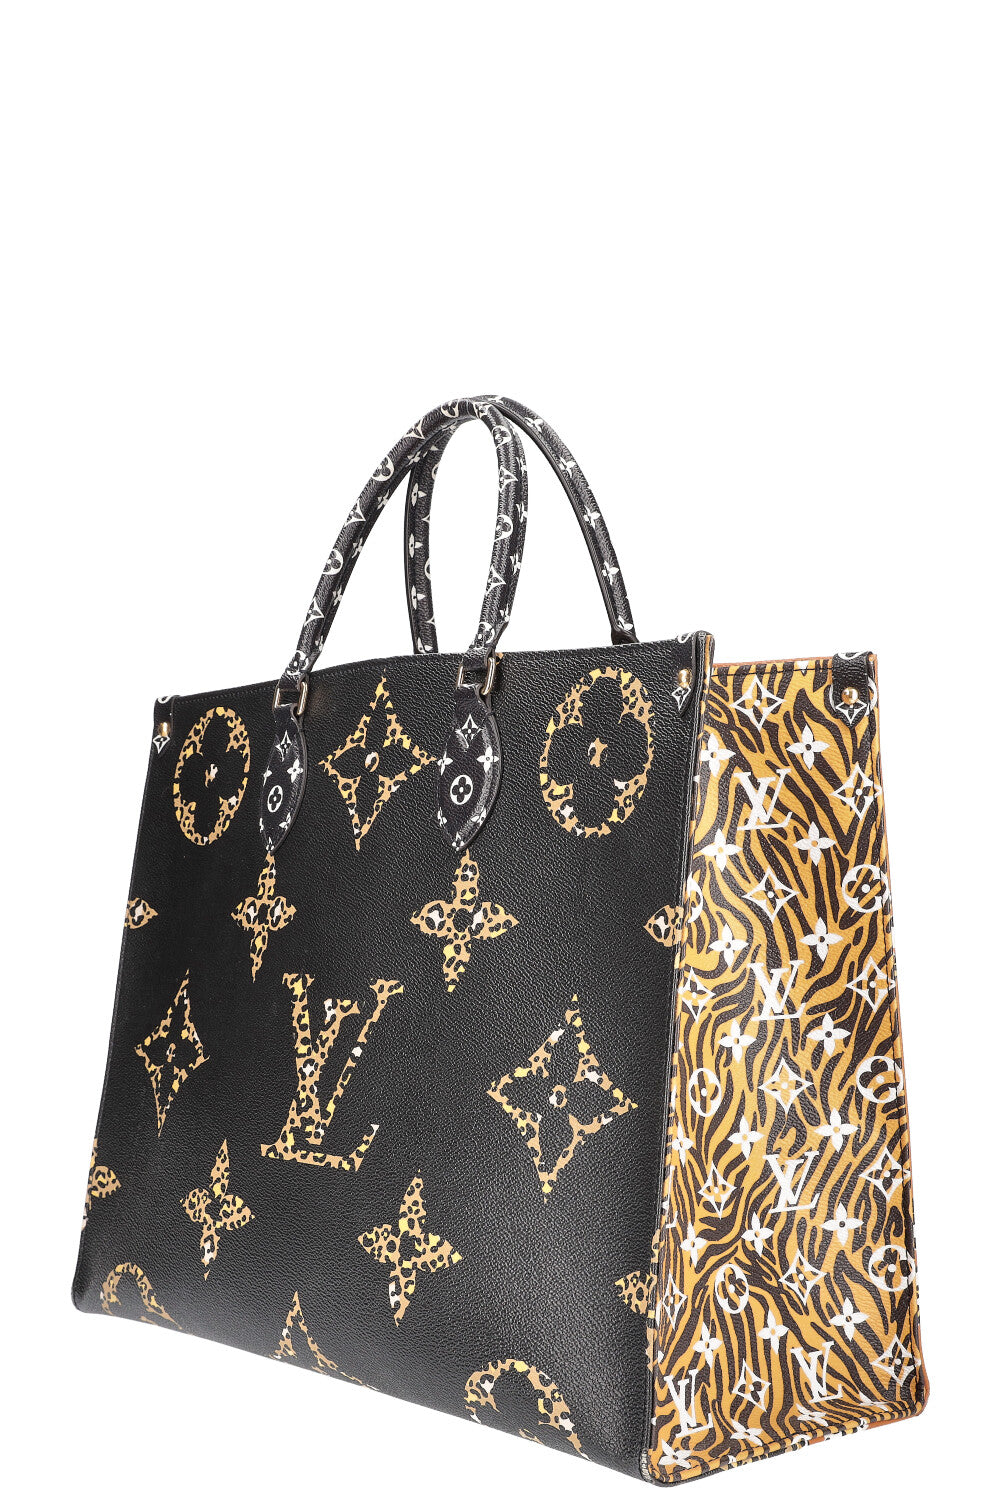 Onthego Louis Vuitton In the Jungle Black White Leopard print